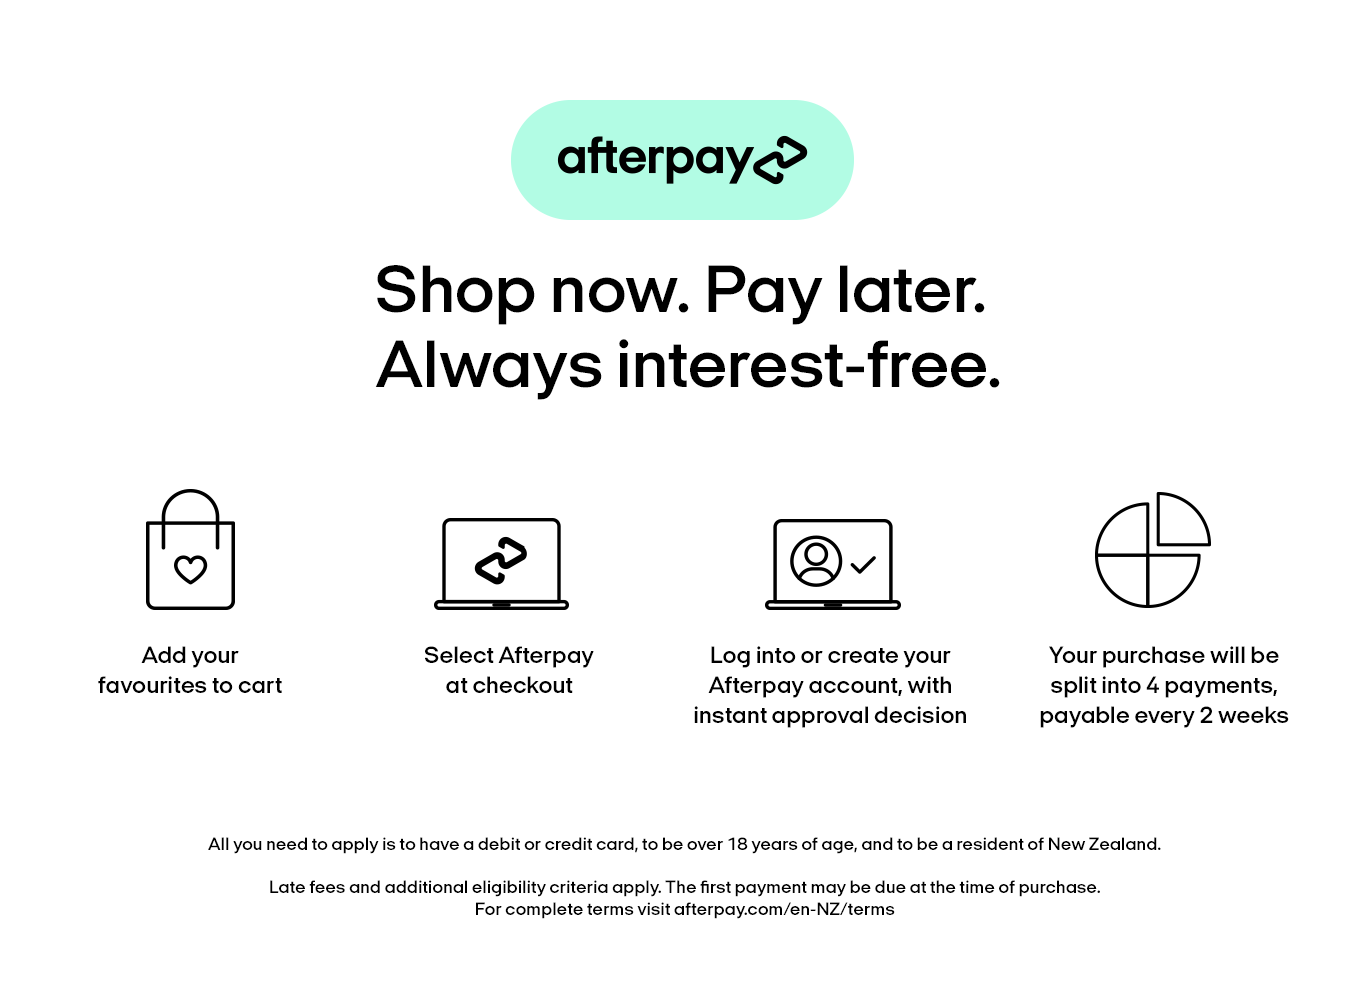 Afterpay Info